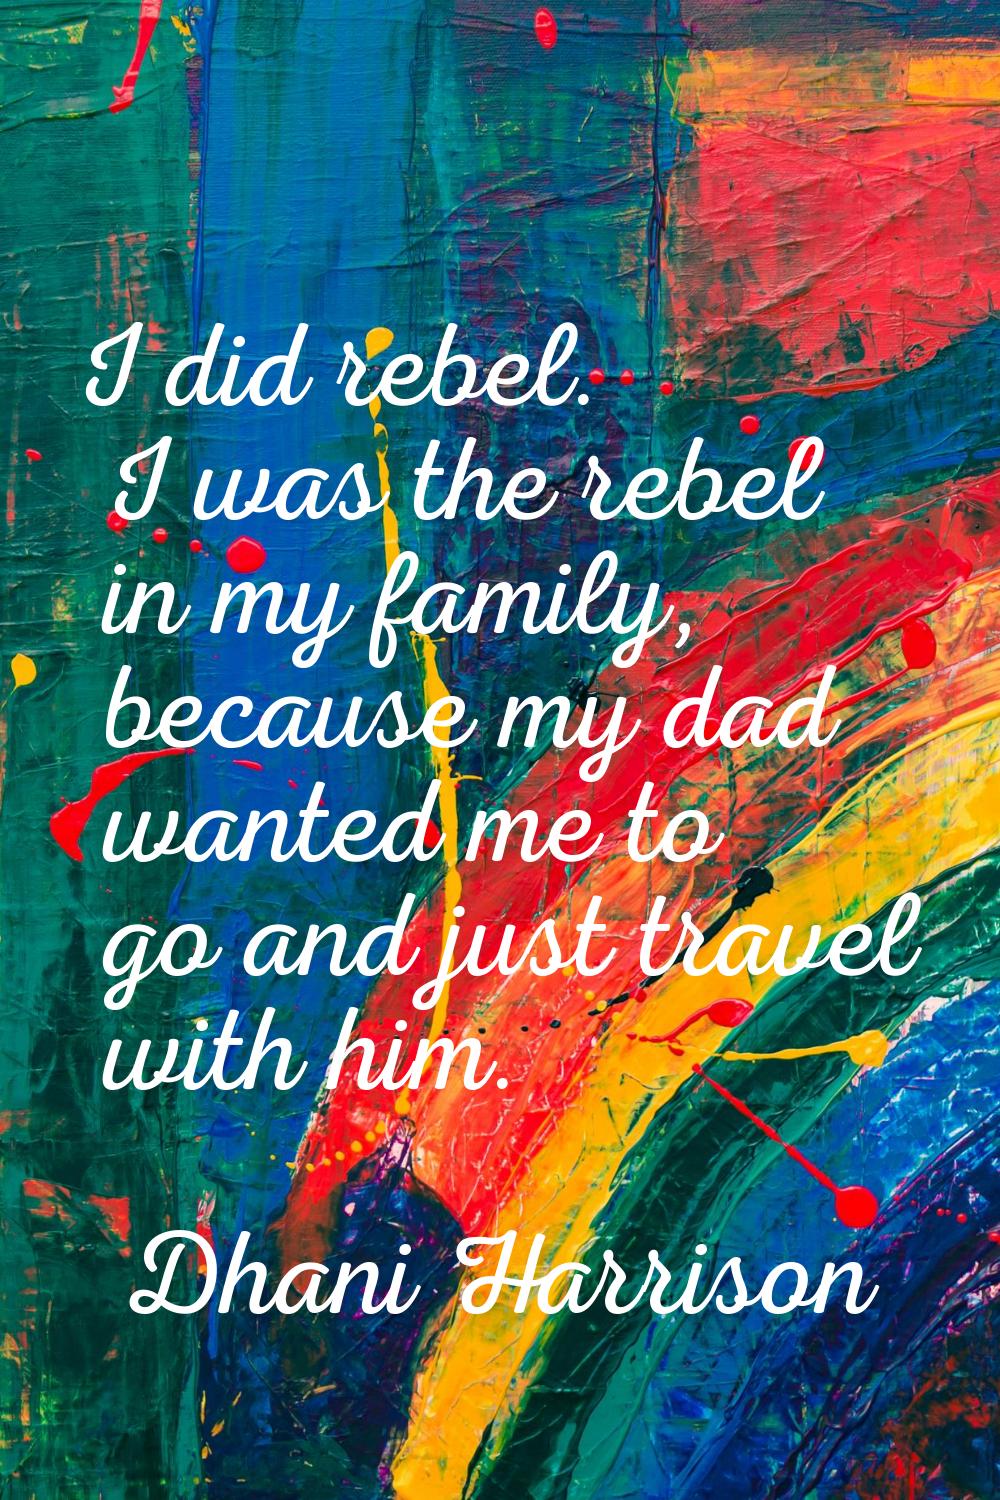 I did rebel. I was the rebel in my family, because my dad wanted me to go and just travel with him.